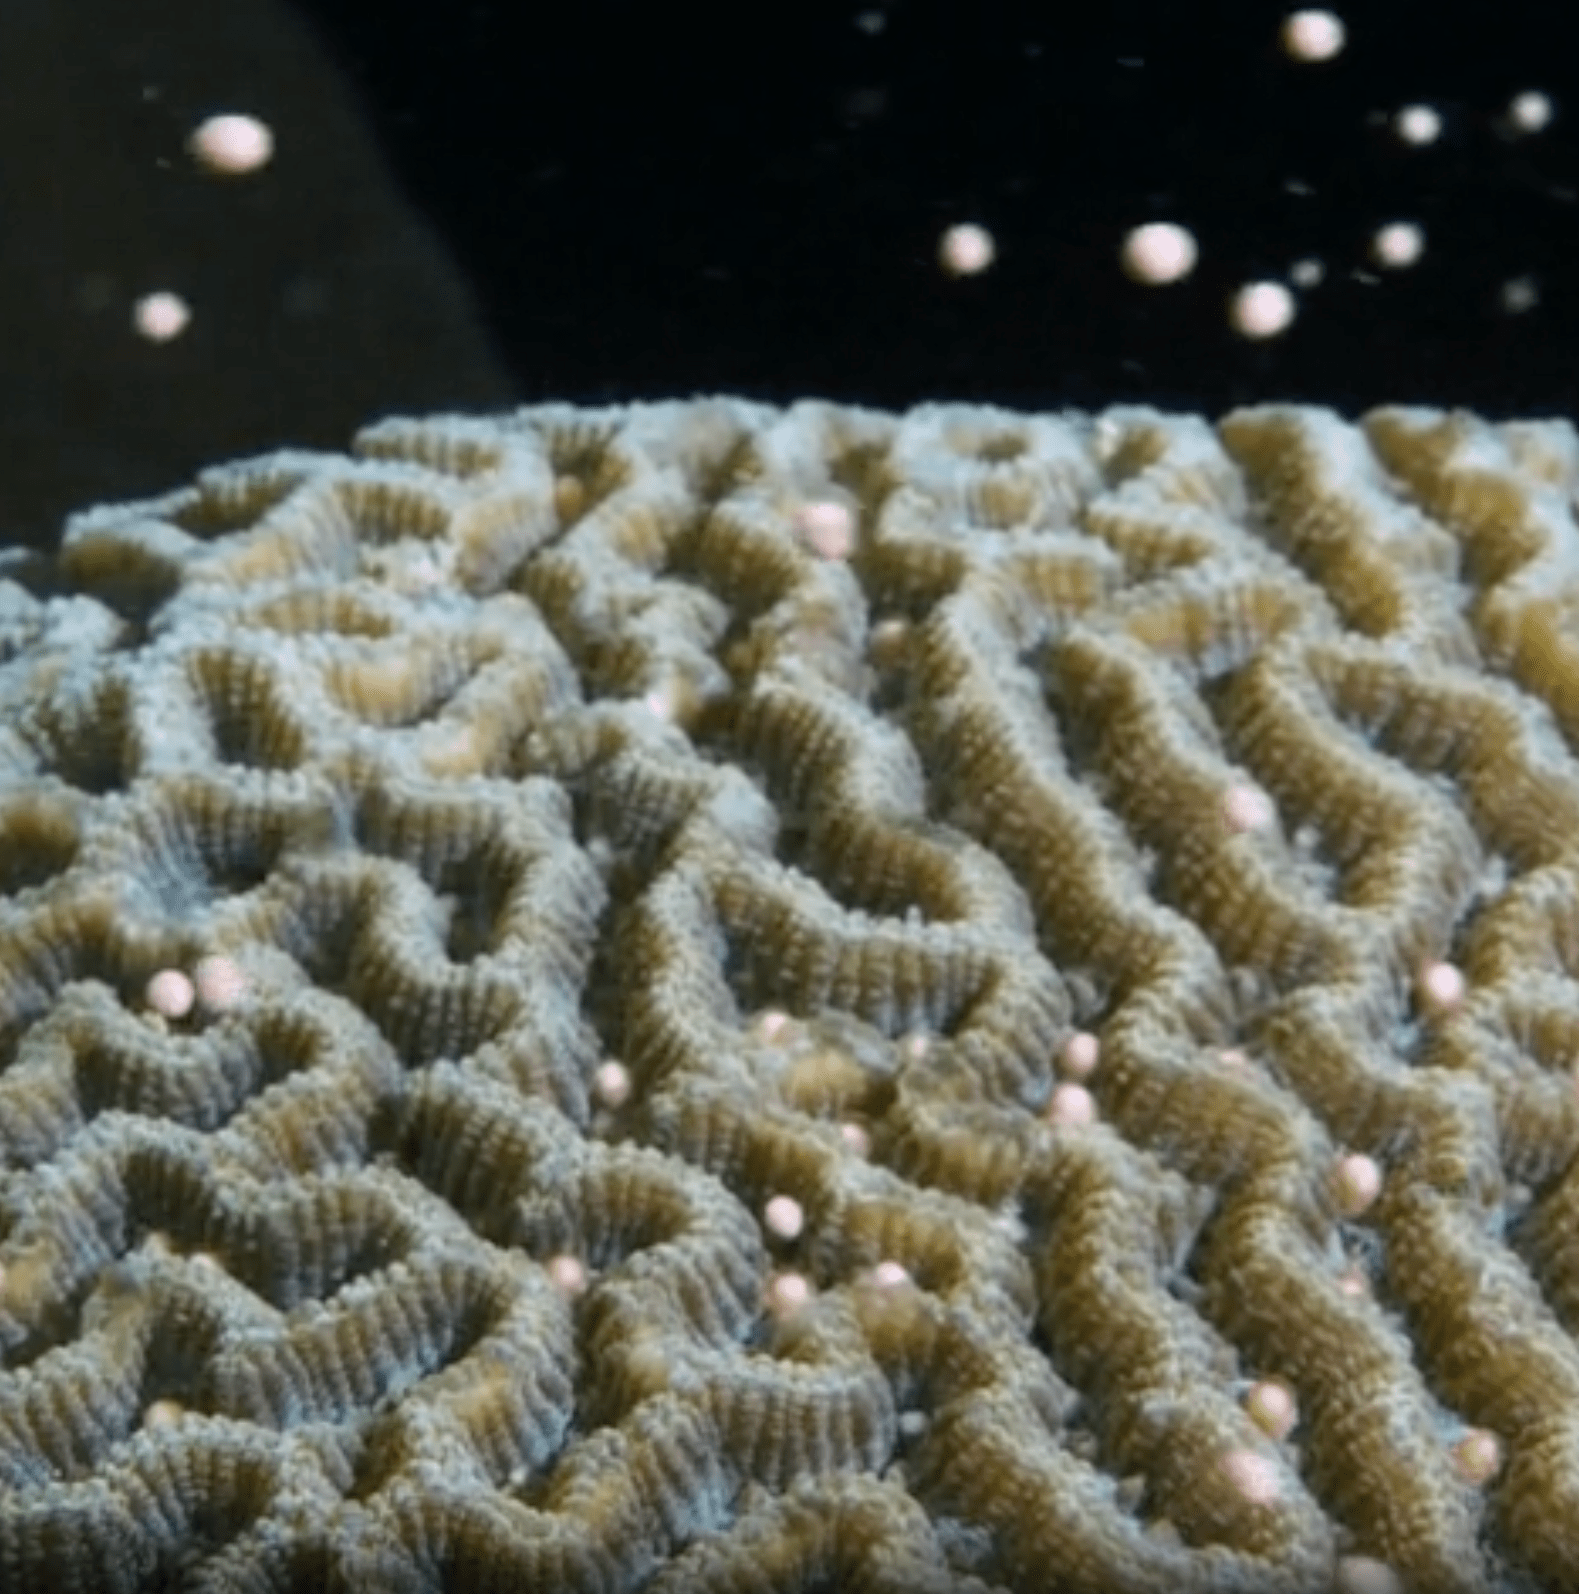 Many coral reefs are dying. This one is exploding with life.